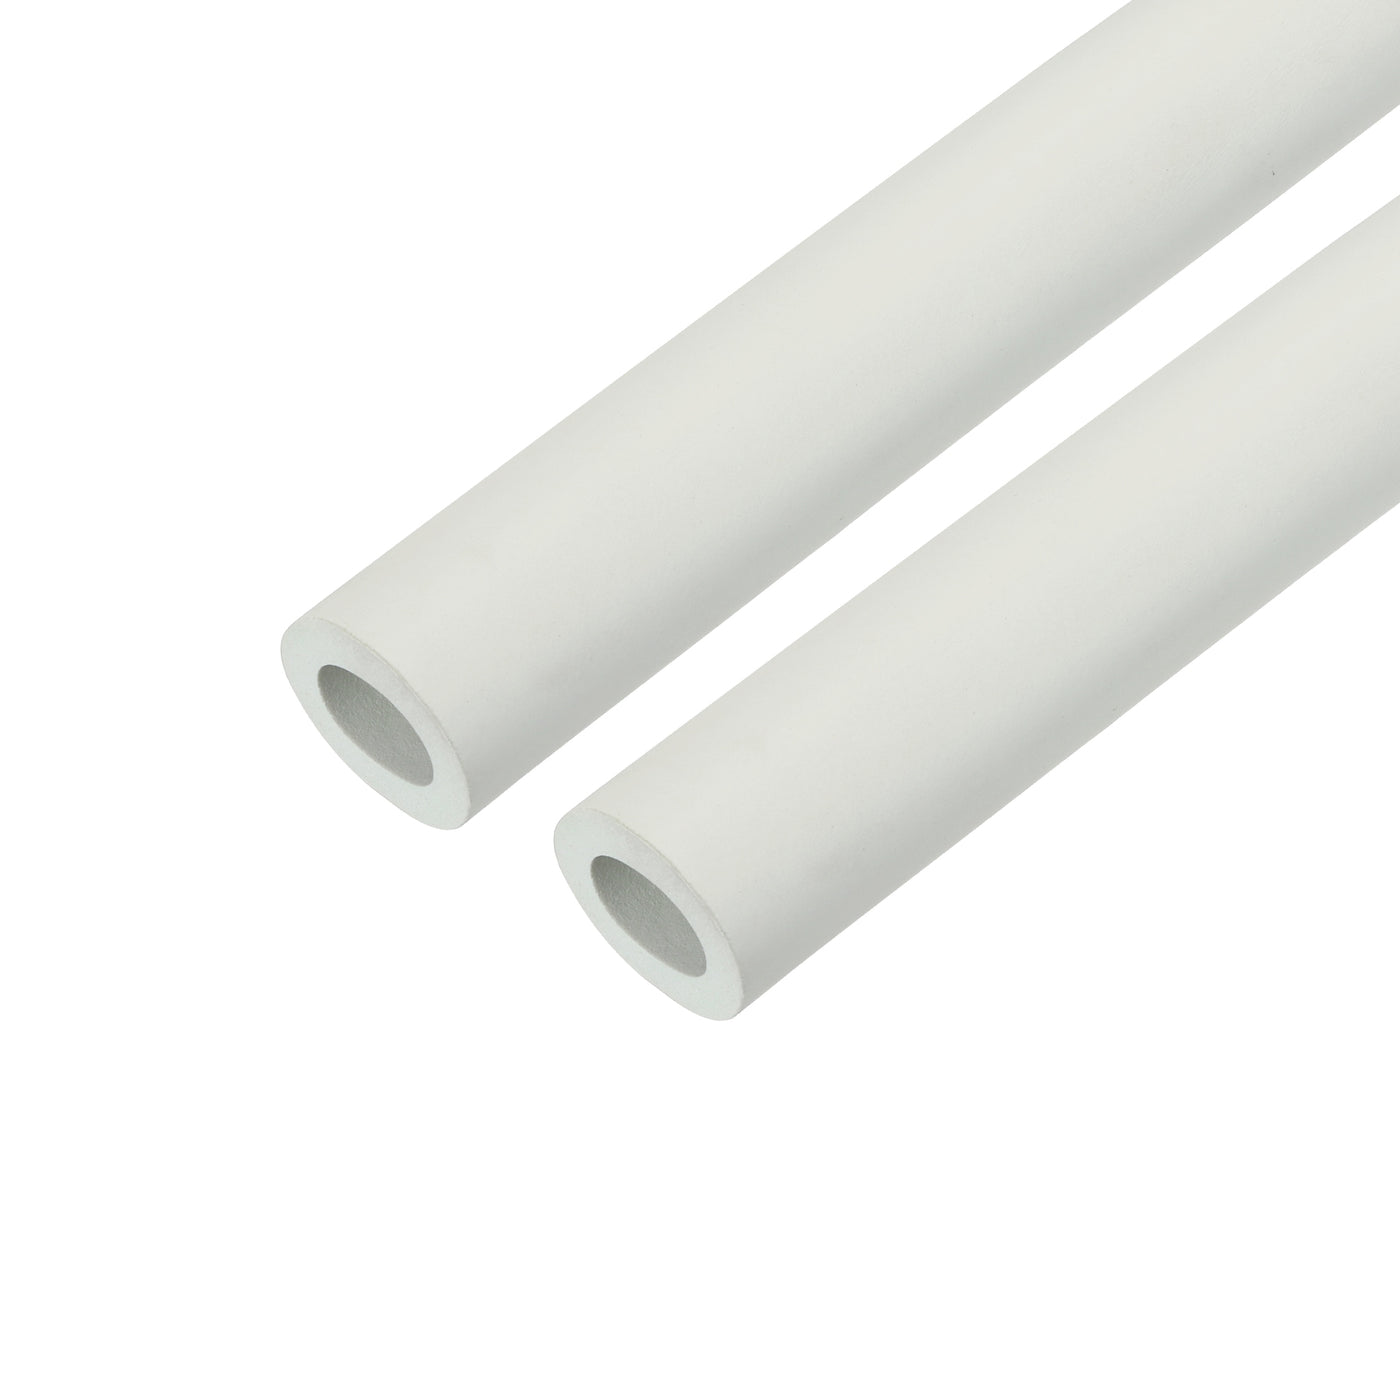 uxcell Uxcell 2pcs 3.3ft Pipe Insulation Tube 18mm ID 30mm OD Foam Tubing for Handle Grip Support, Beige